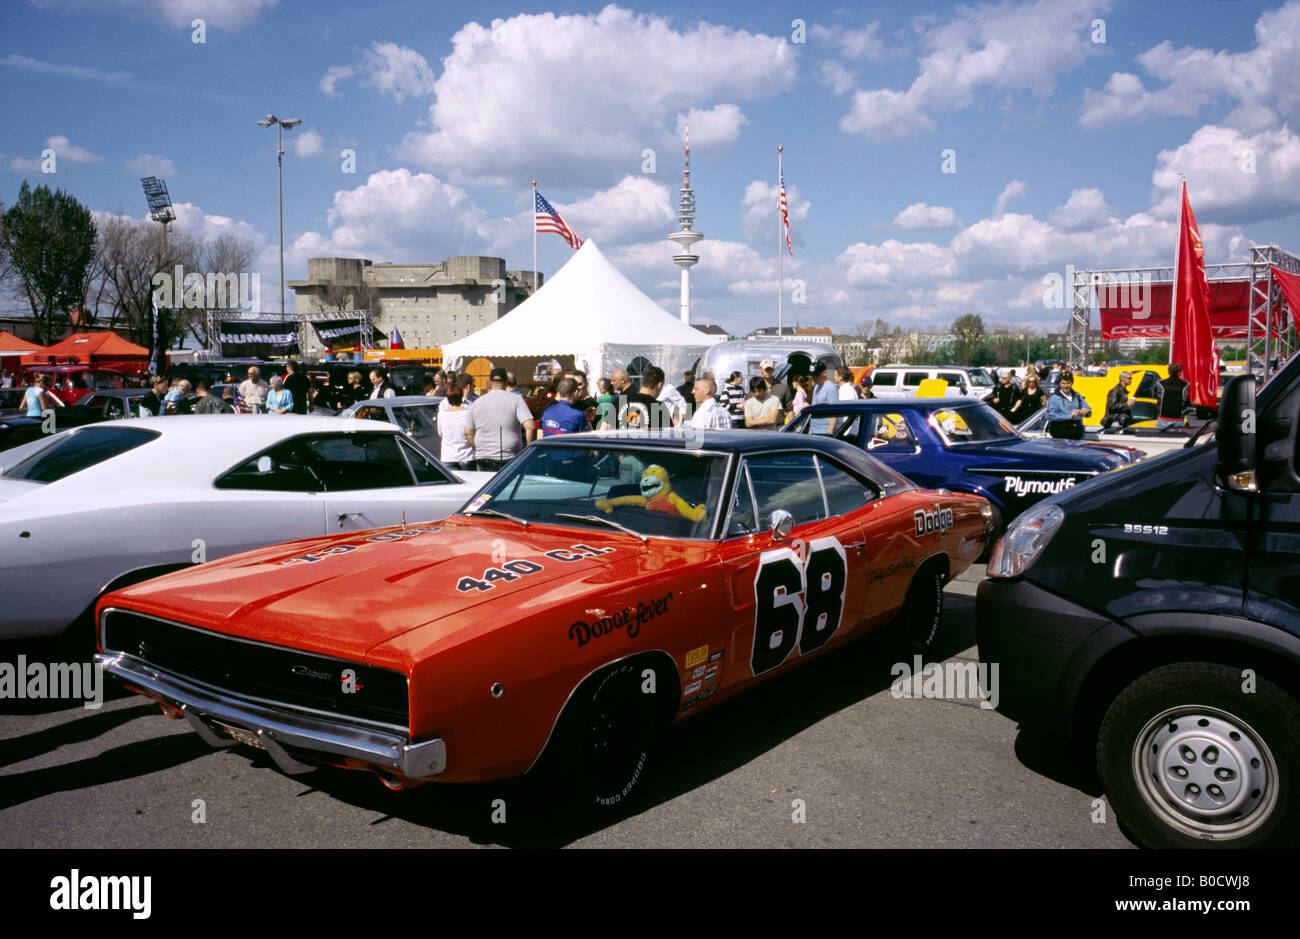 May 3, 2008 - 1968 Dodge Charger R/T (B-Body) at the Street Mag Show at Heiligengeistfeld in the German city of Hamburg. Stock Photo